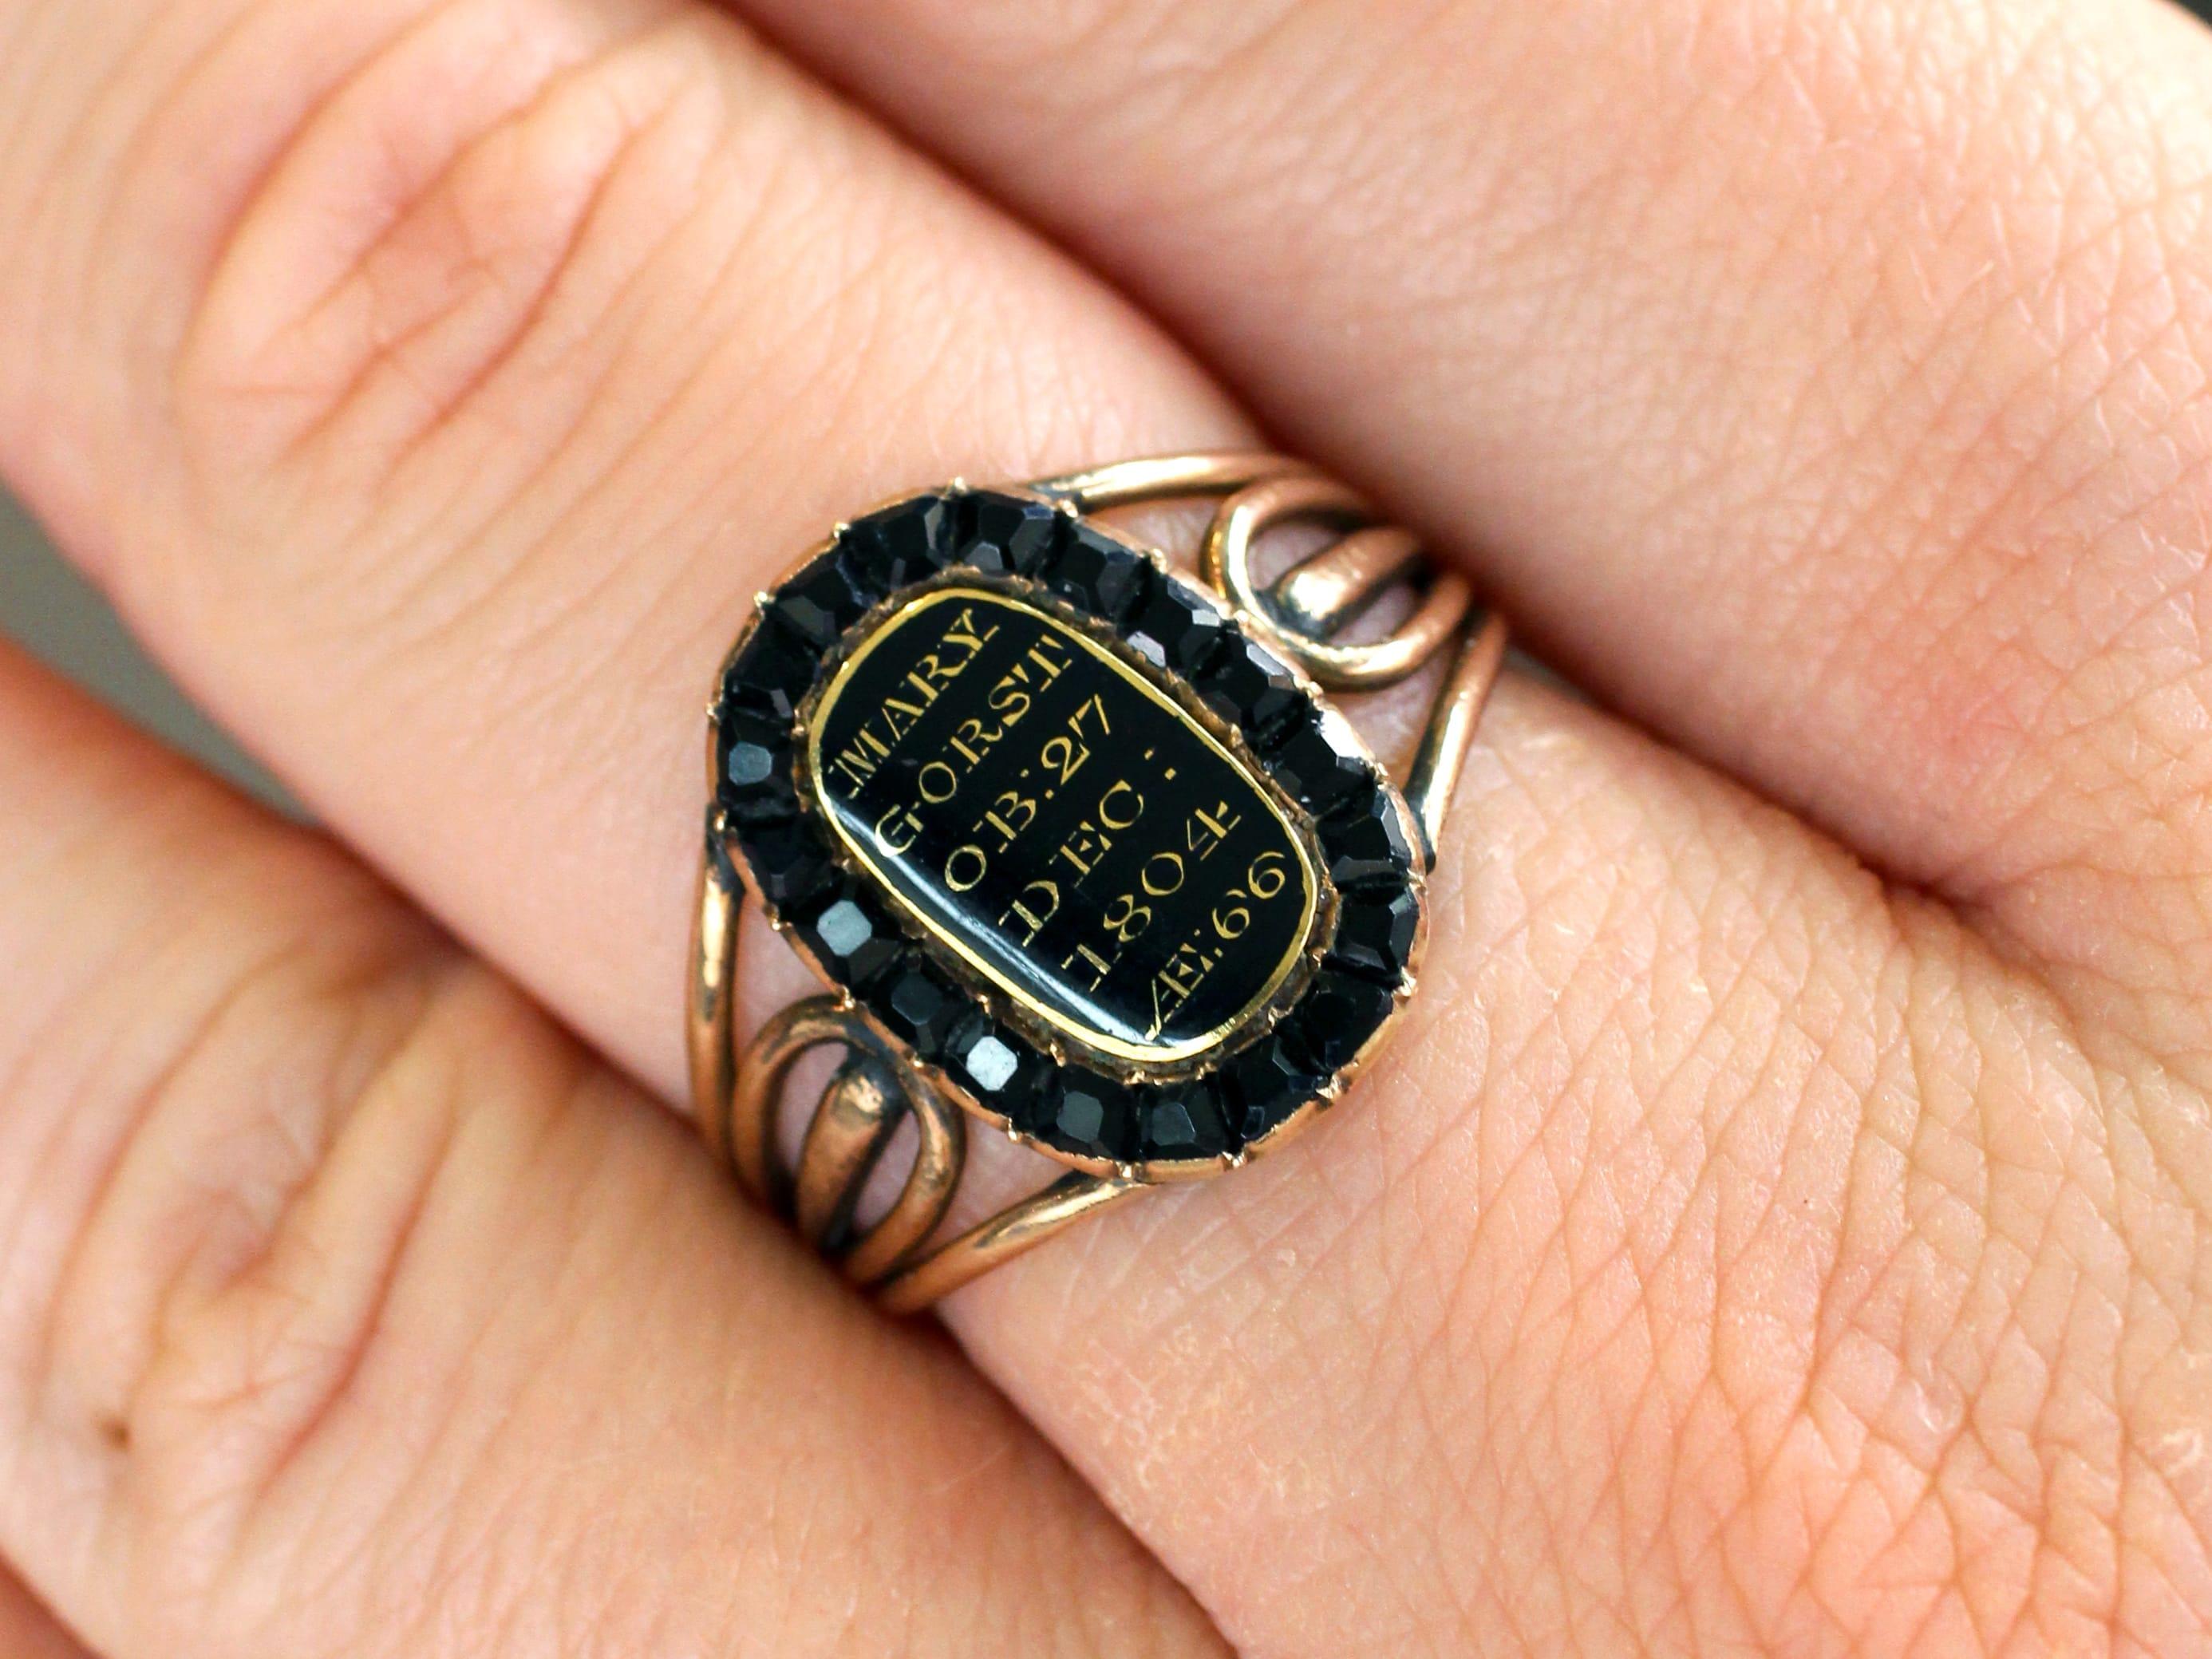 Antique 0.57Ct Jet, Black Enamel and 9k Yellow Gold Mourning Ring Circa 1804 In Excellent Condition For Sale In Jesmond, Newcastle Upon Tyne